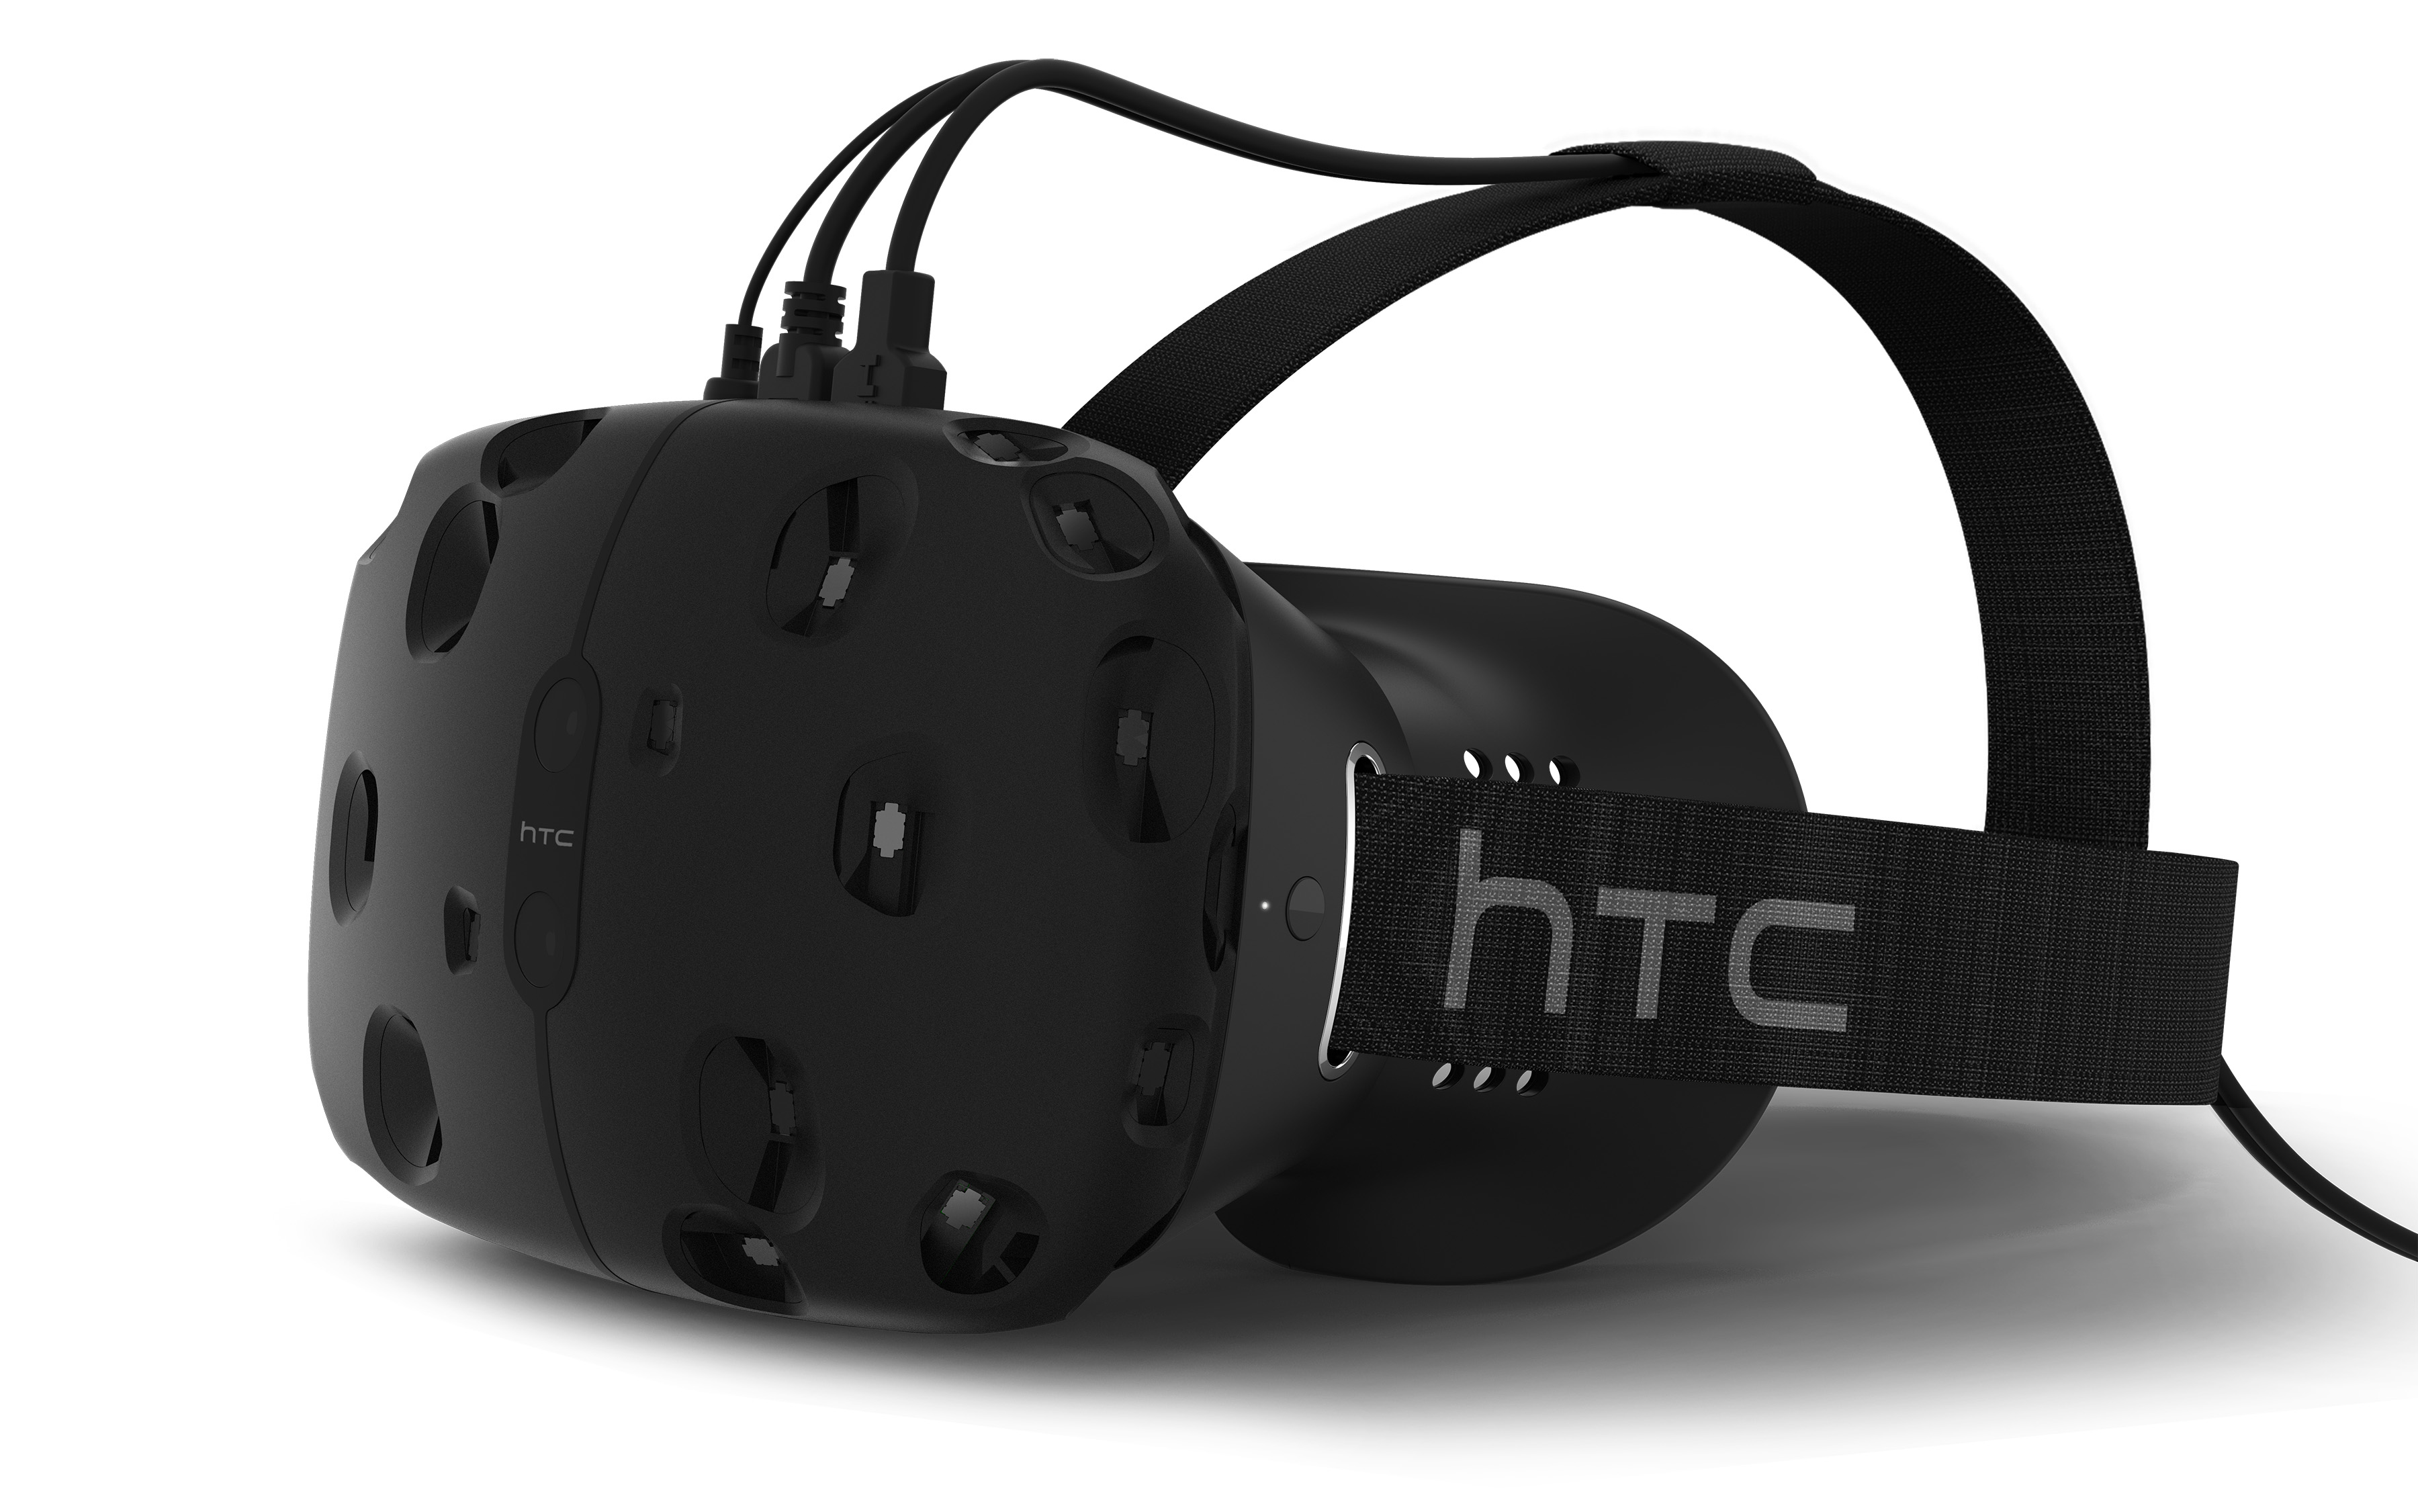 Vive, Re, and other non-smartphone products will play an increasing role in HTC's revenues going forward.